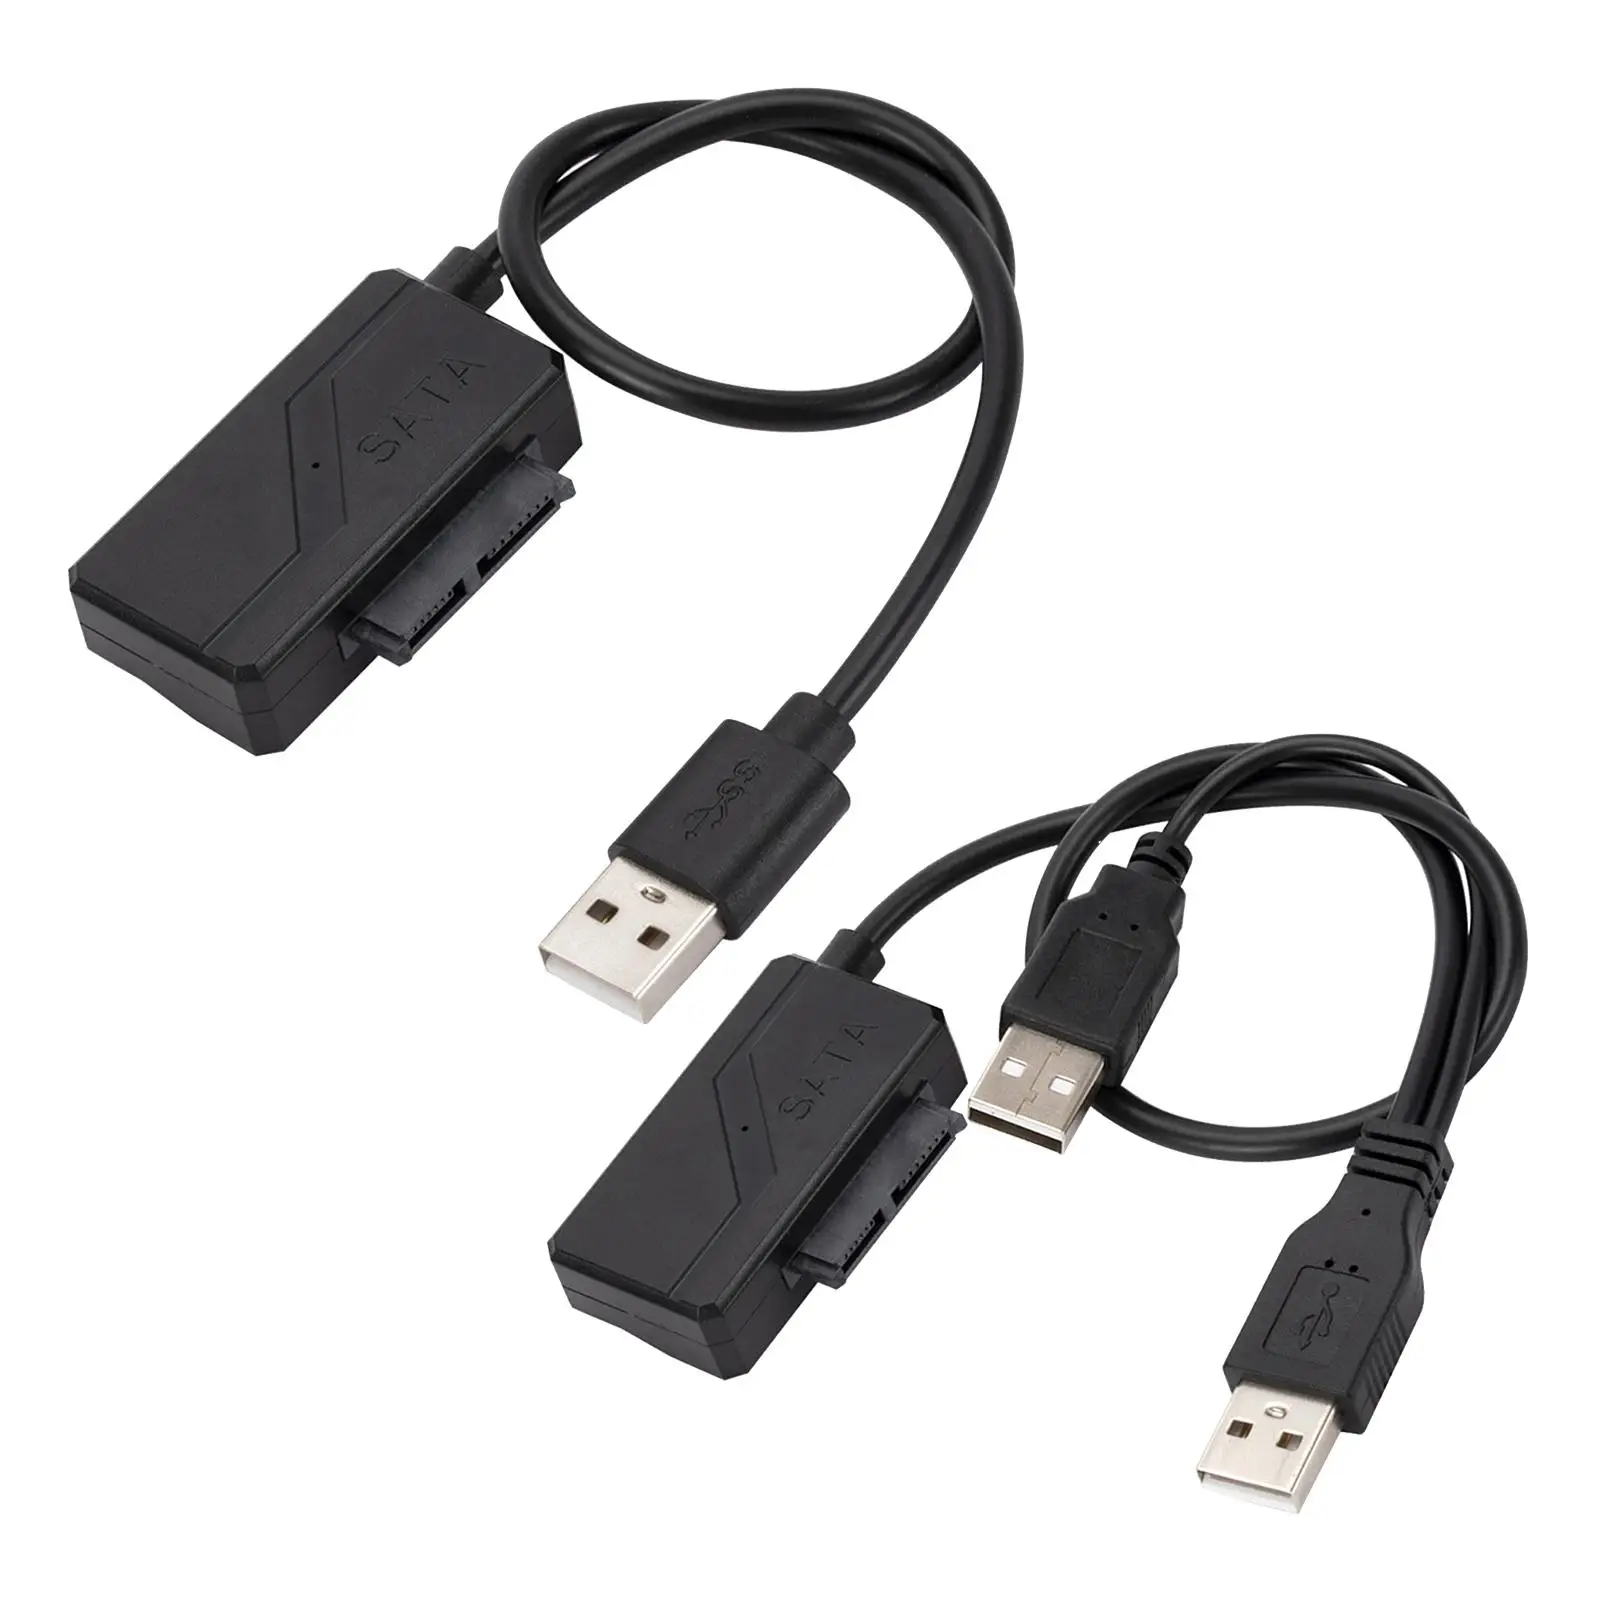 USB 2.0 to SATA 7+6 13Pin Adapter Cable Optical Drive Plug and Play Transfer Cord for Laptop Cd-Rom Dvd-Rom Electronics